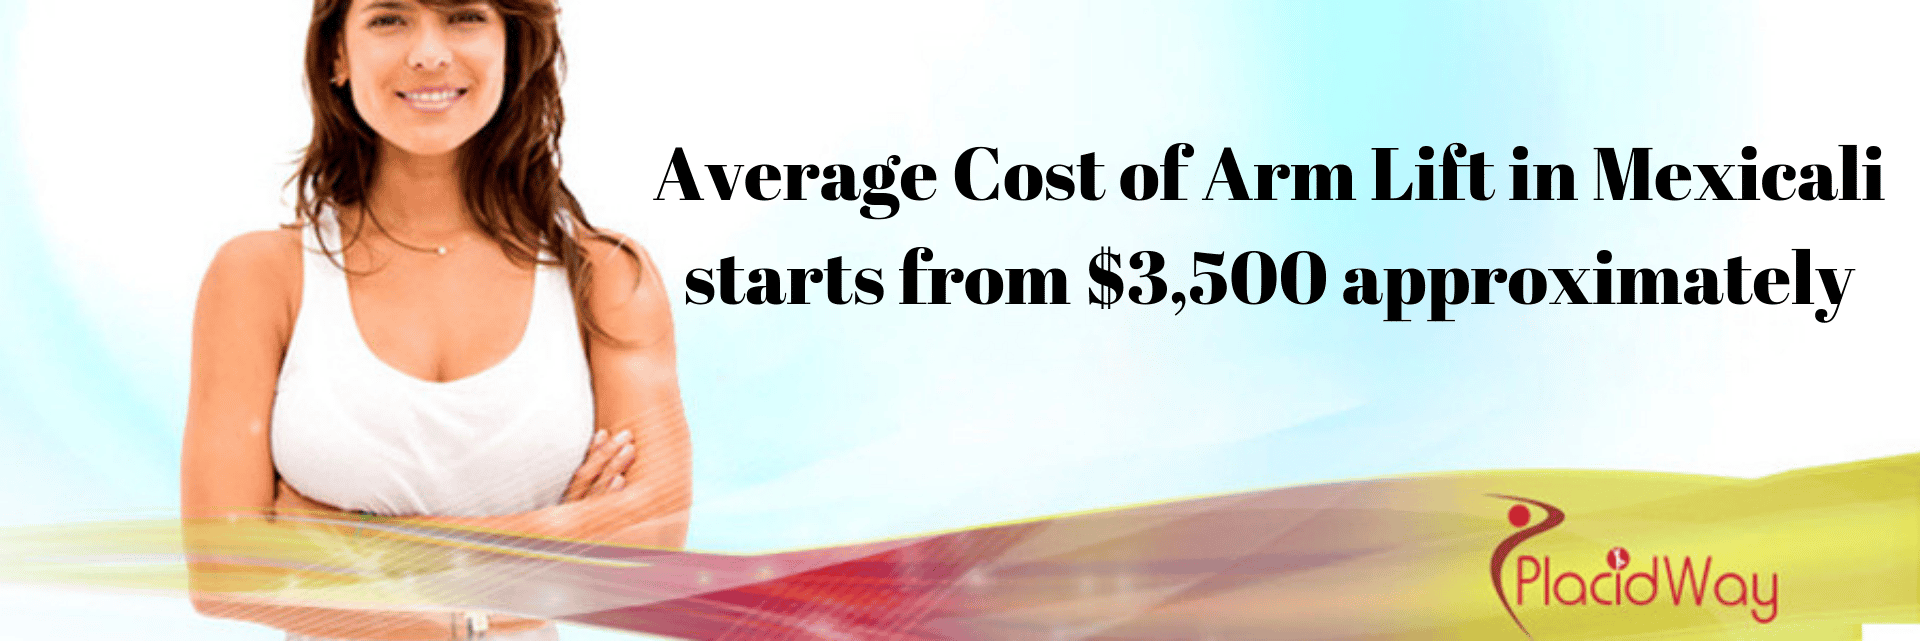 Average Cost of Arm Lift in Mexicali starts from $3,500 approximately